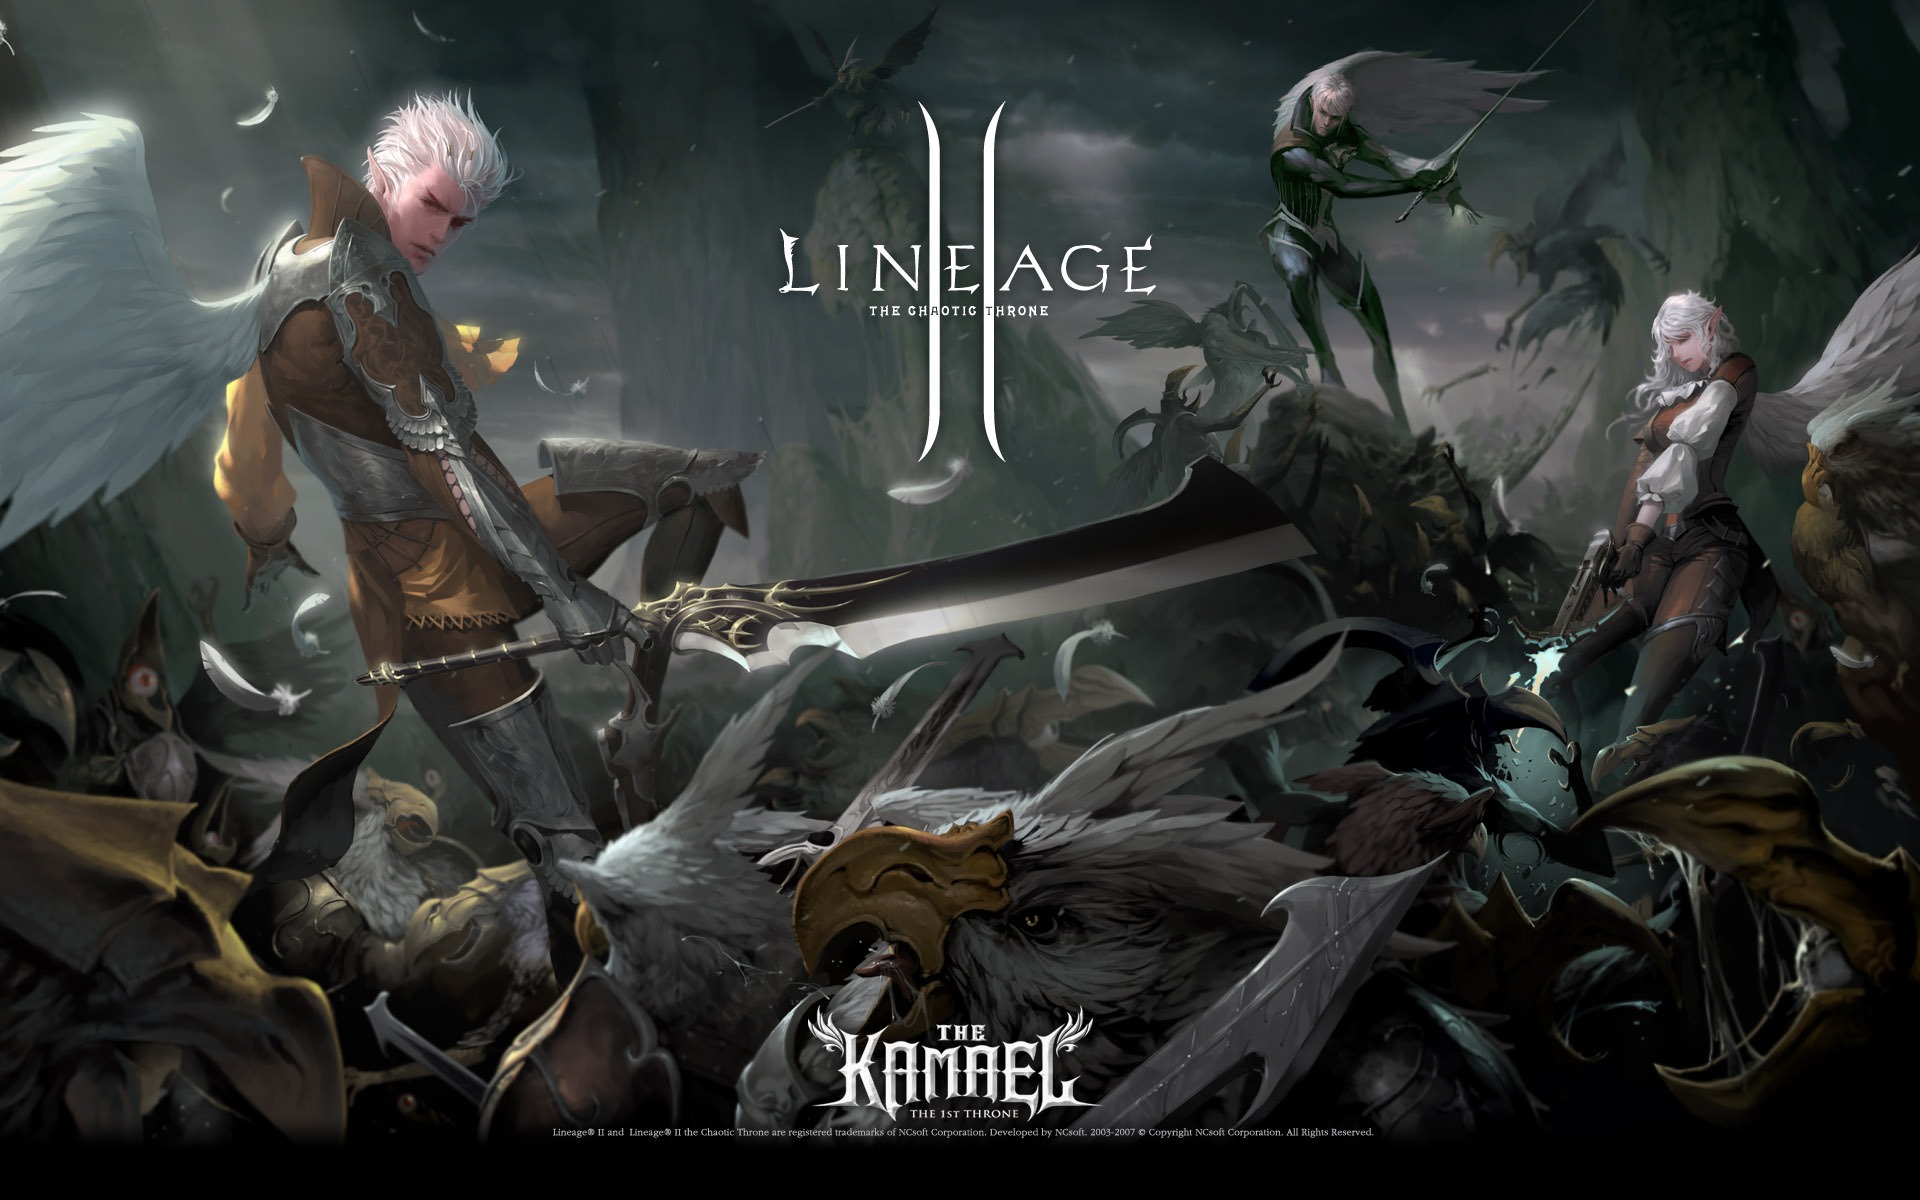 LINEAGE Ⅱ modeling HD gaming wallpapers #6 - 1920x1200